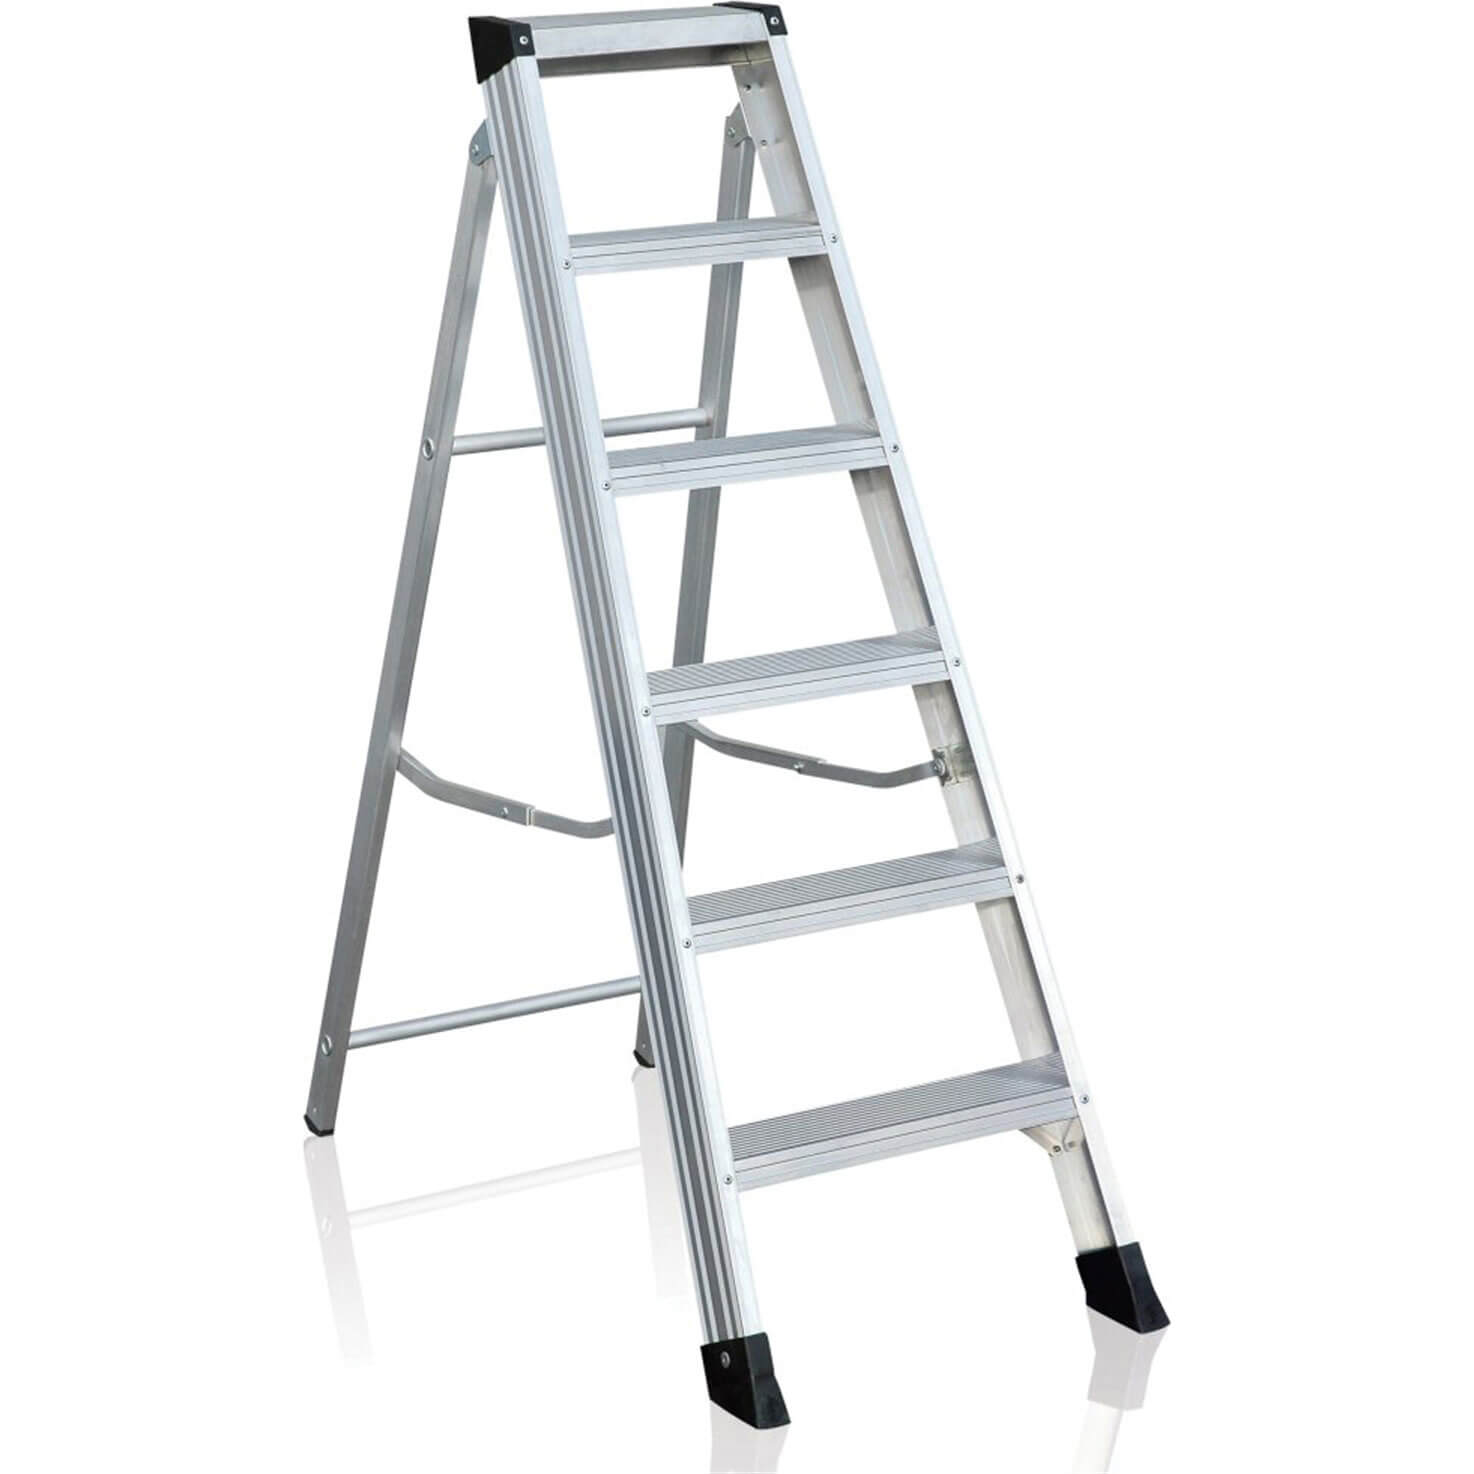 Image of Zarges Trade Swingback Step Ladder 6